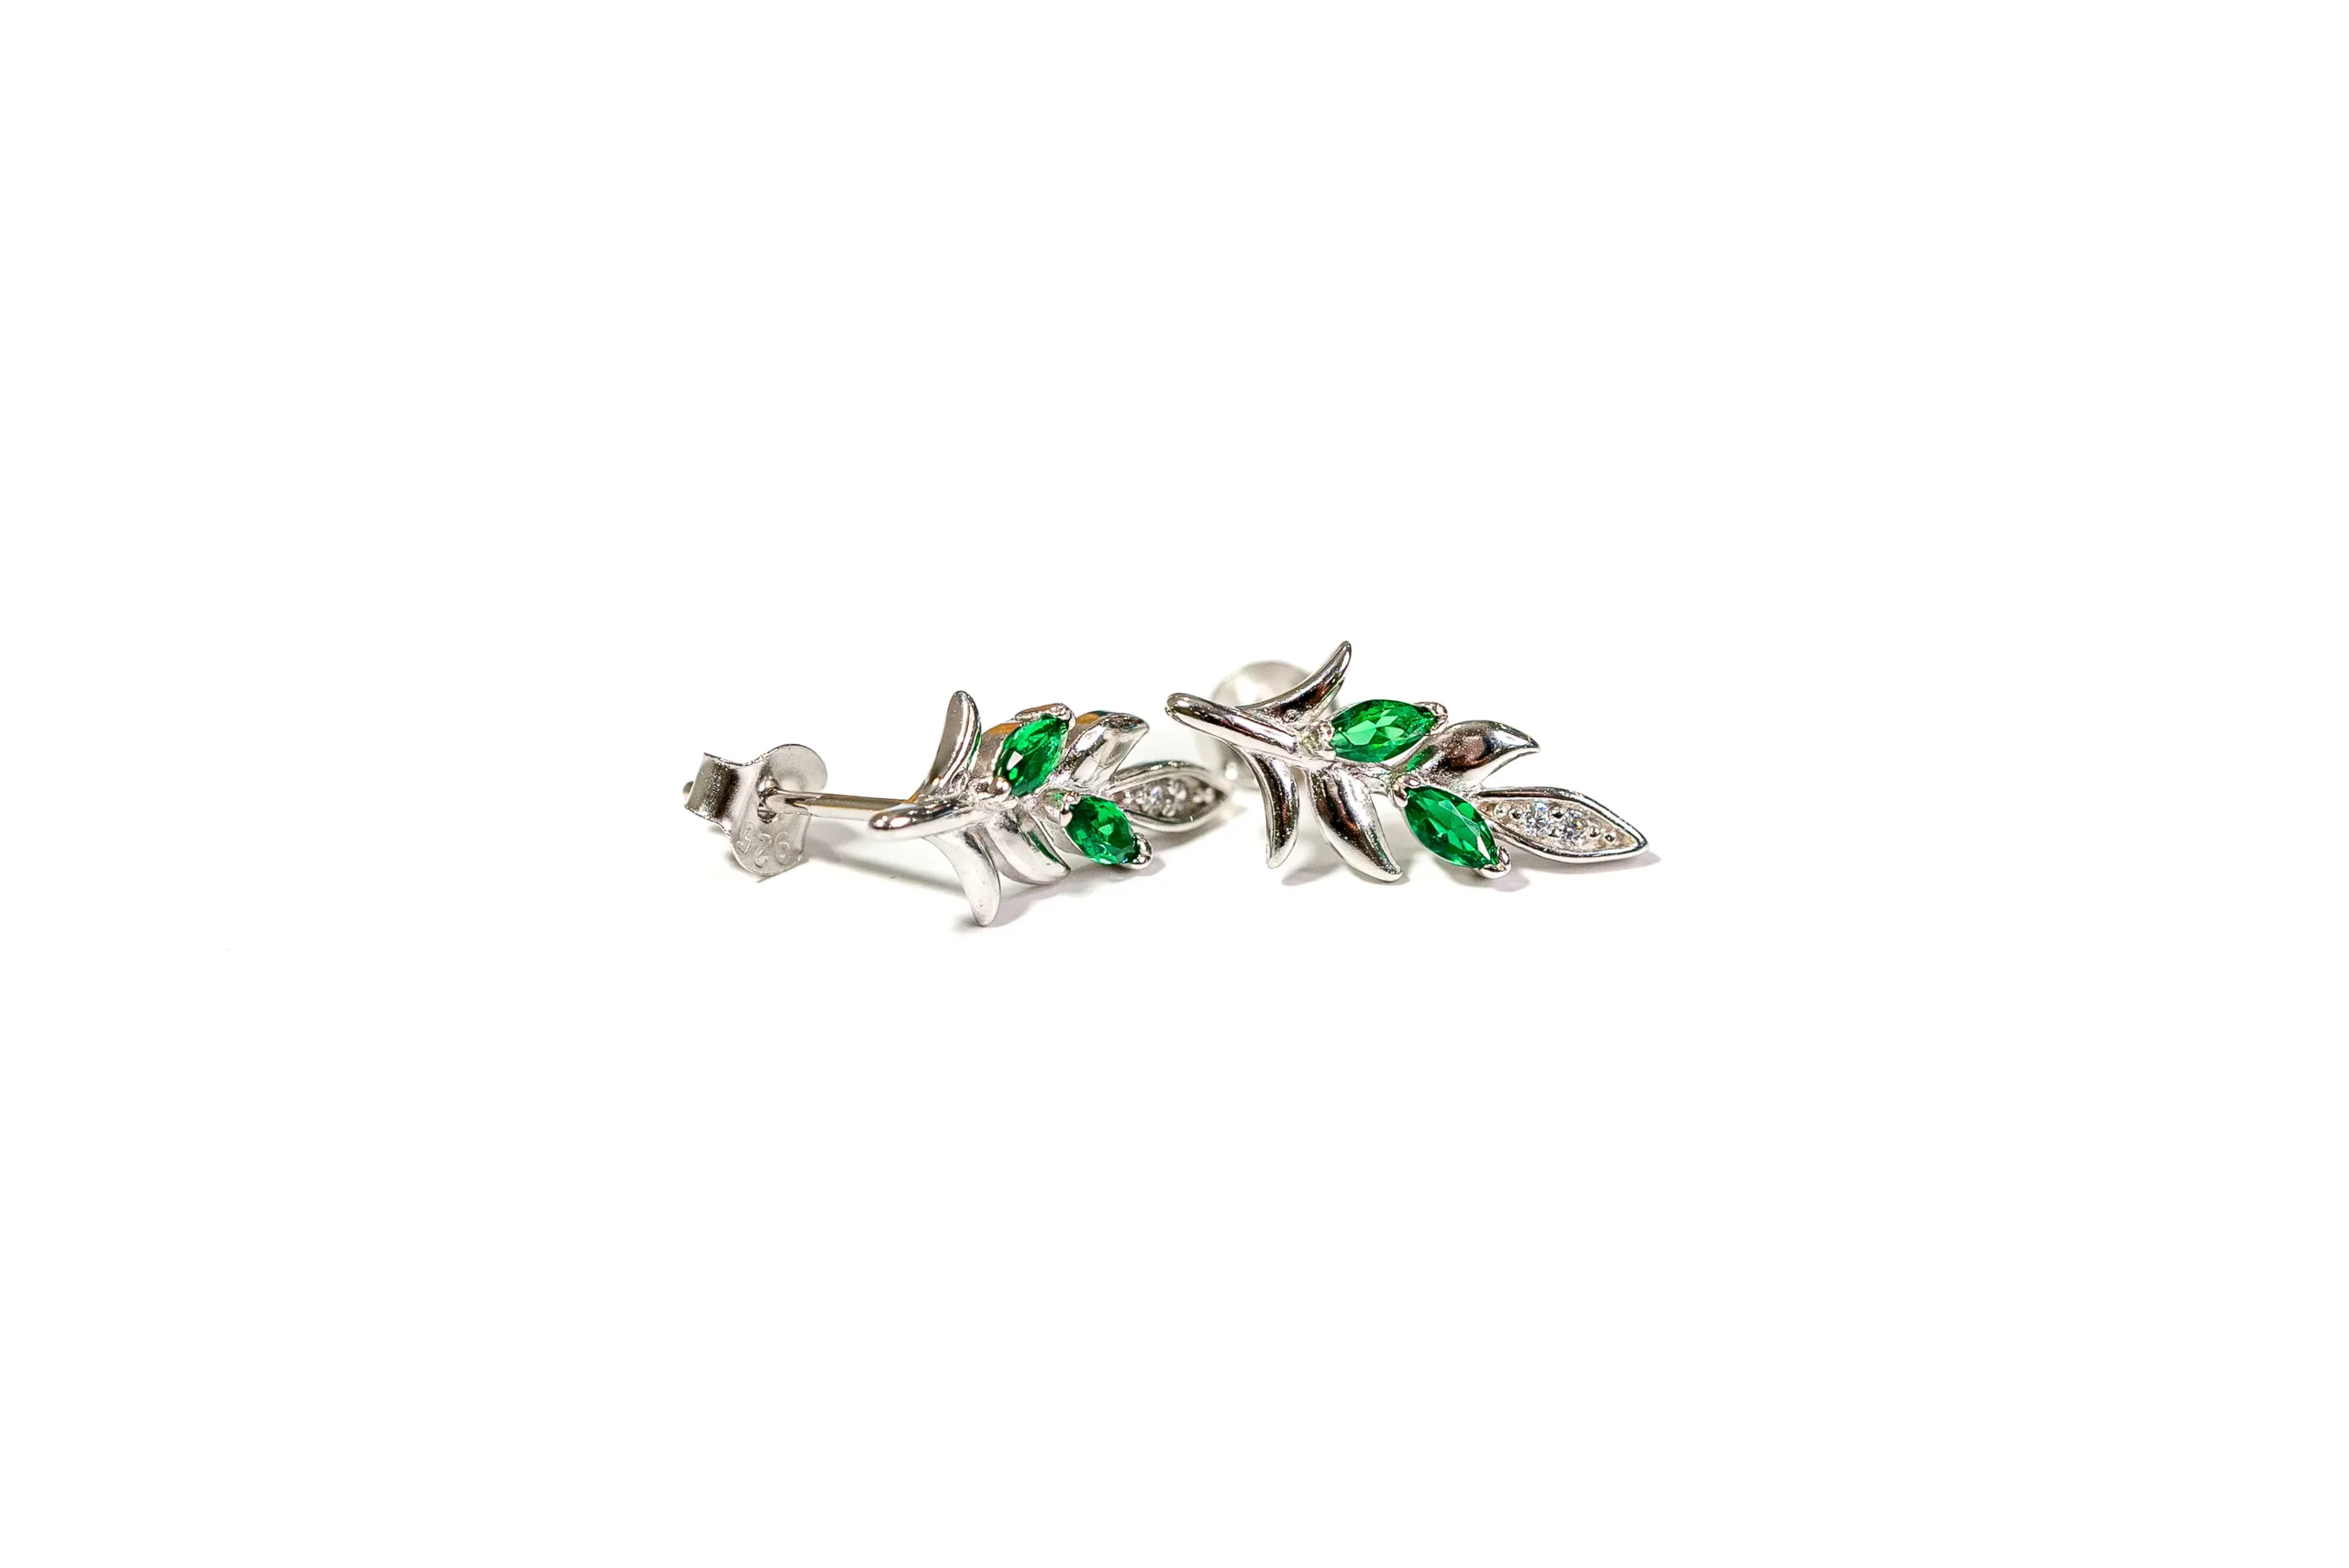 Silver Leaf Green Gemstones Earring With Zircon , Sewar Silver Leaf Green Gemstones Earring With Zircon